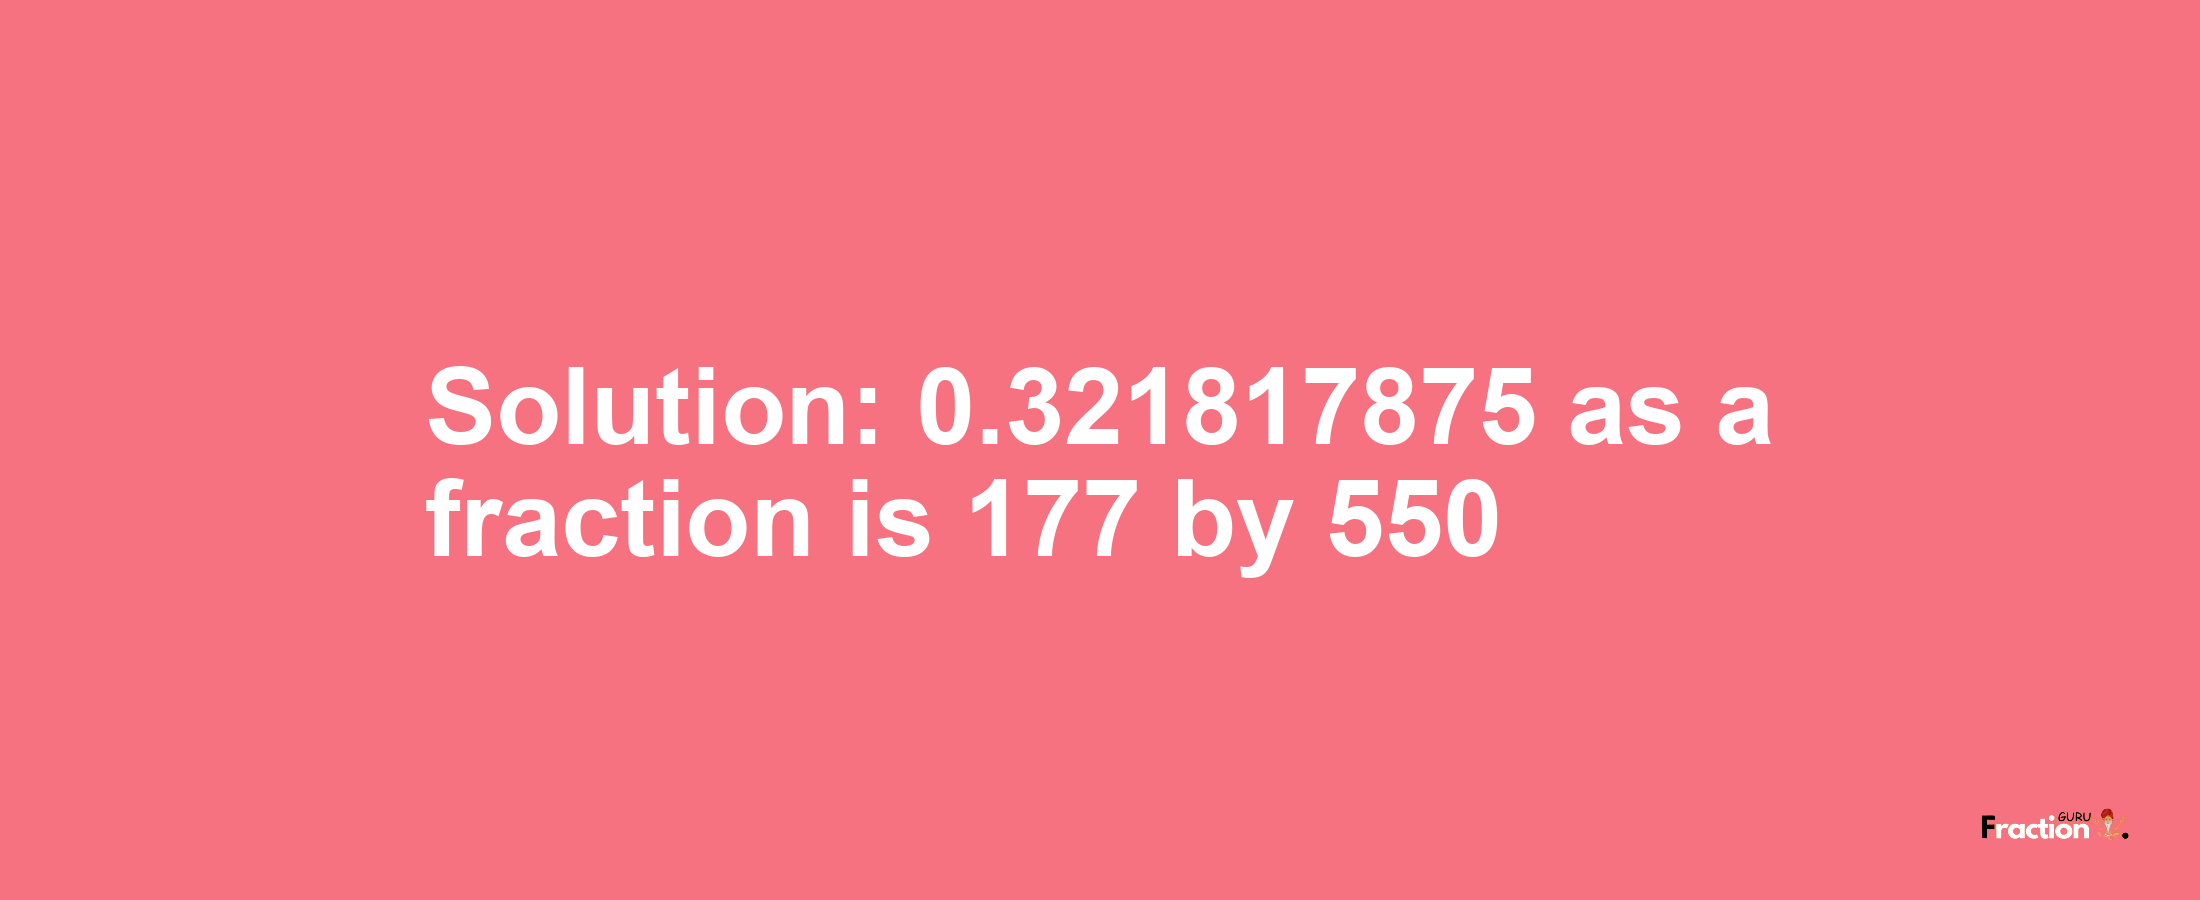 Solution:0.321817875 as a fraction is 177/550